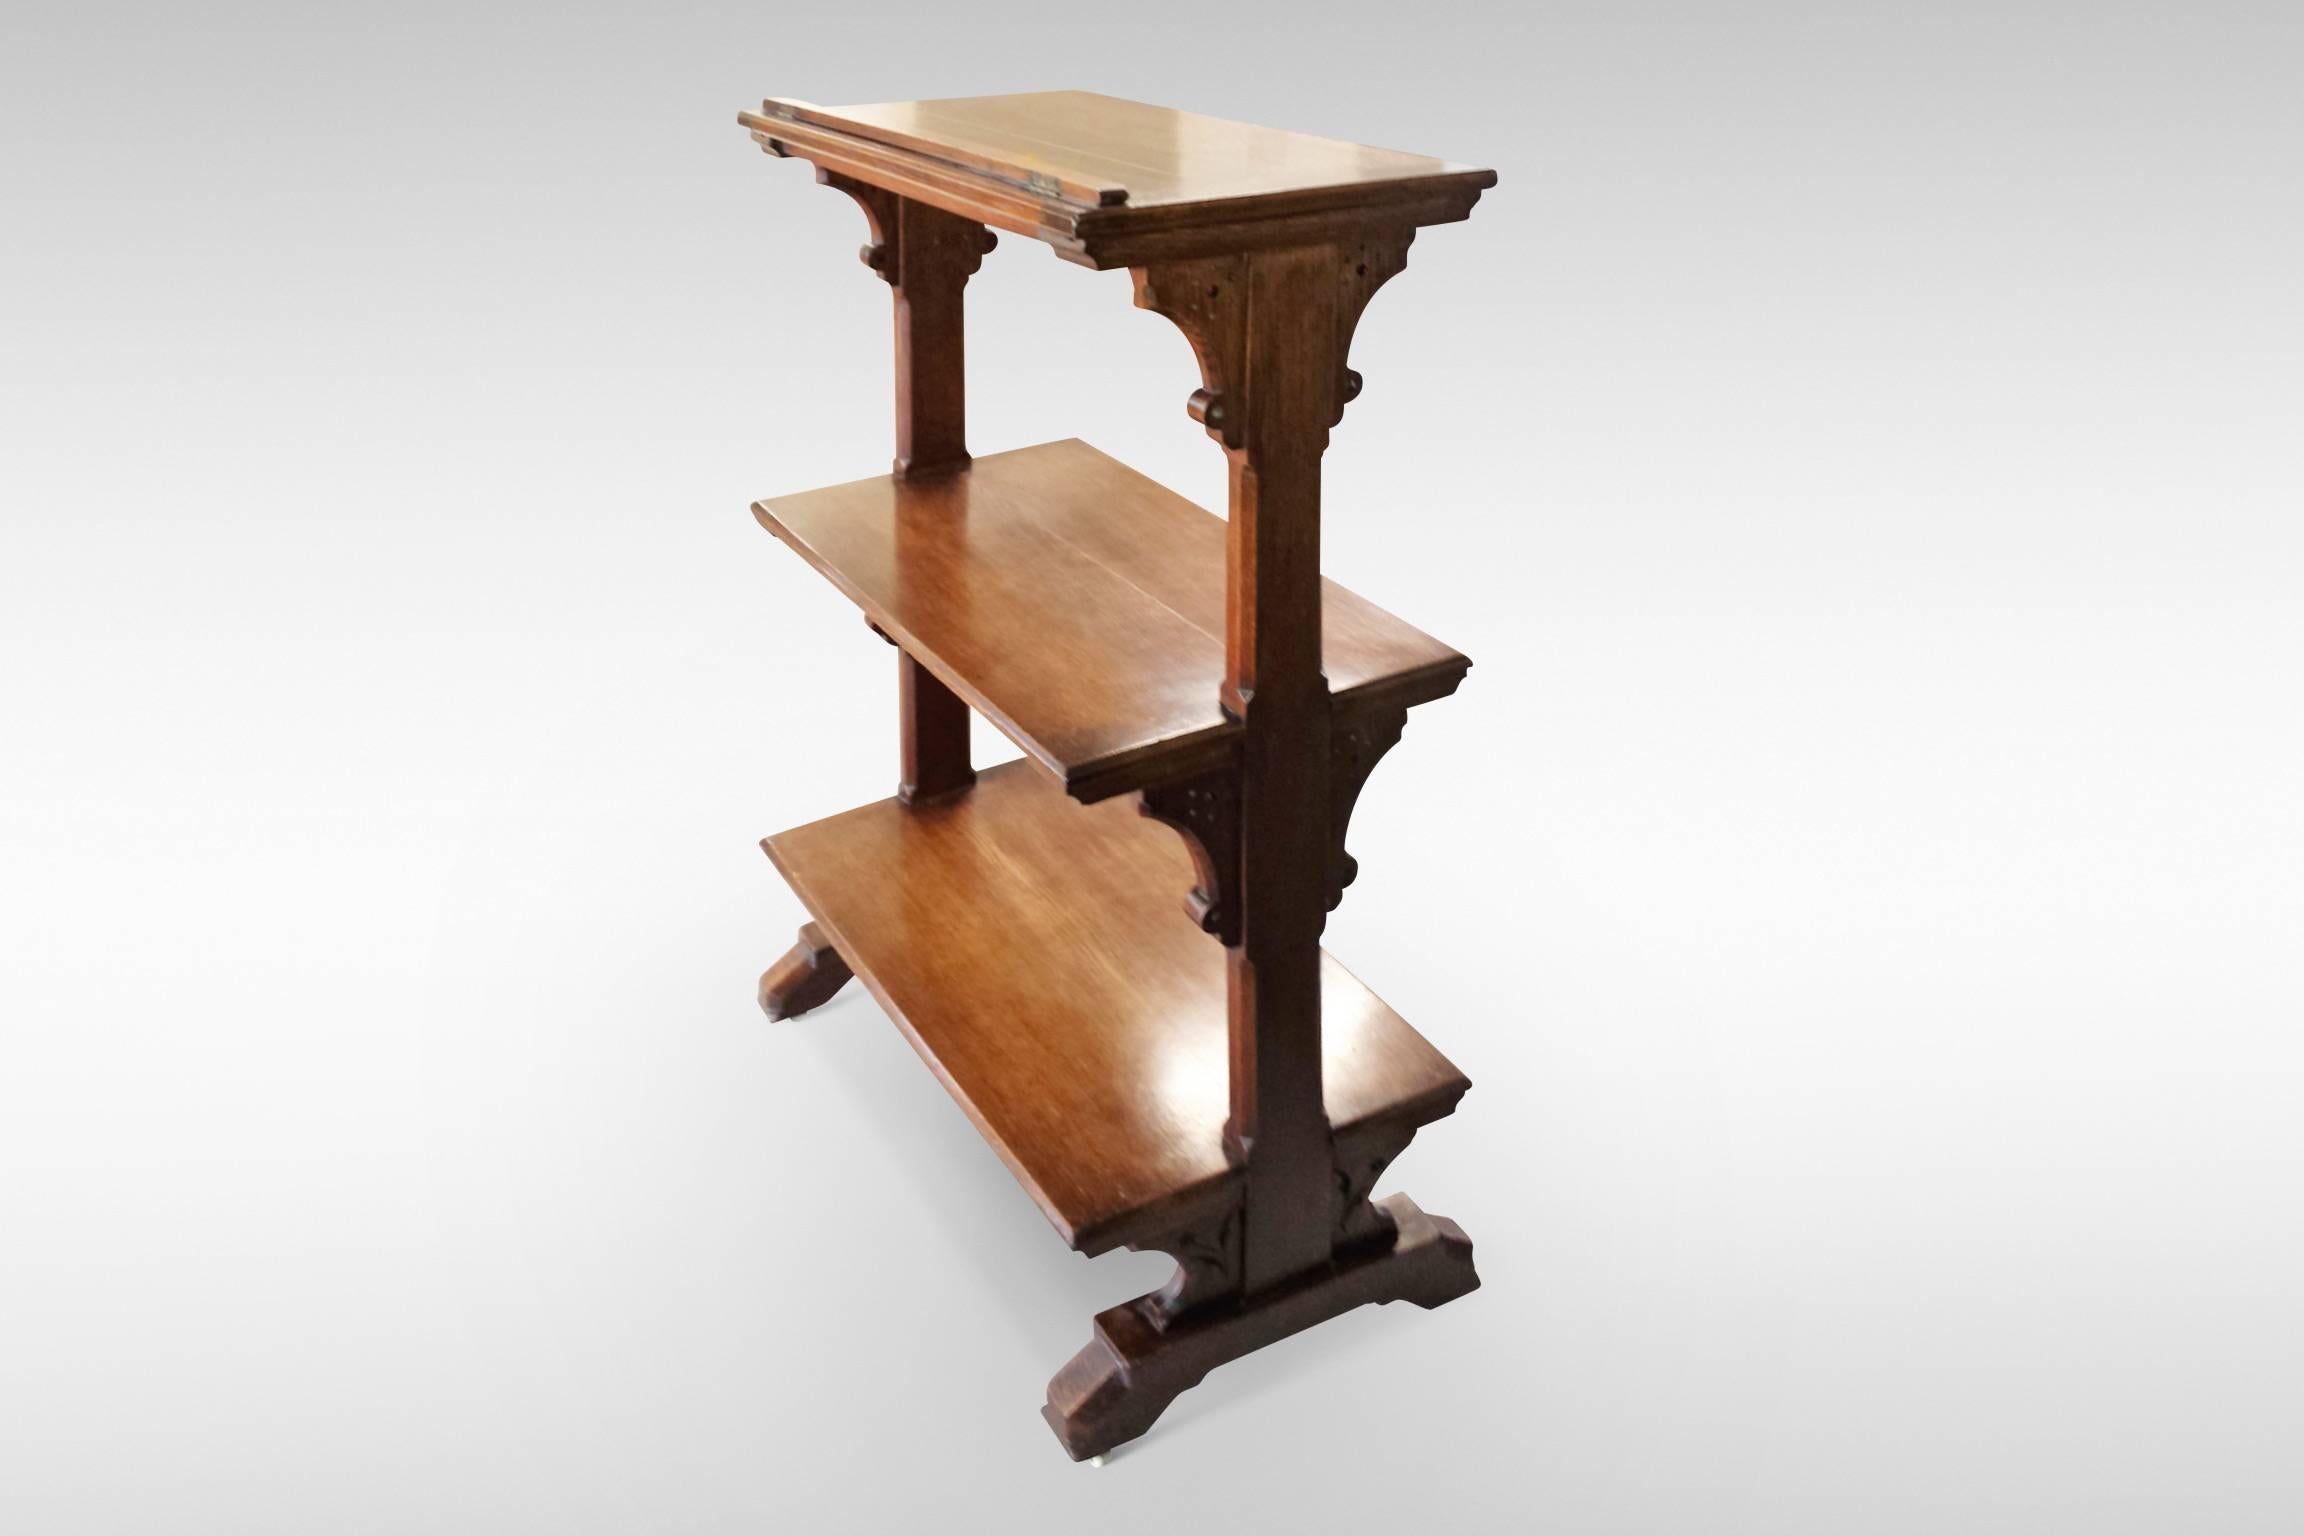 An oak Arts & Crafts movement library or music stand with adjustable slope, attributed to Charles Lock Eastlake.
circa 1880-1900.